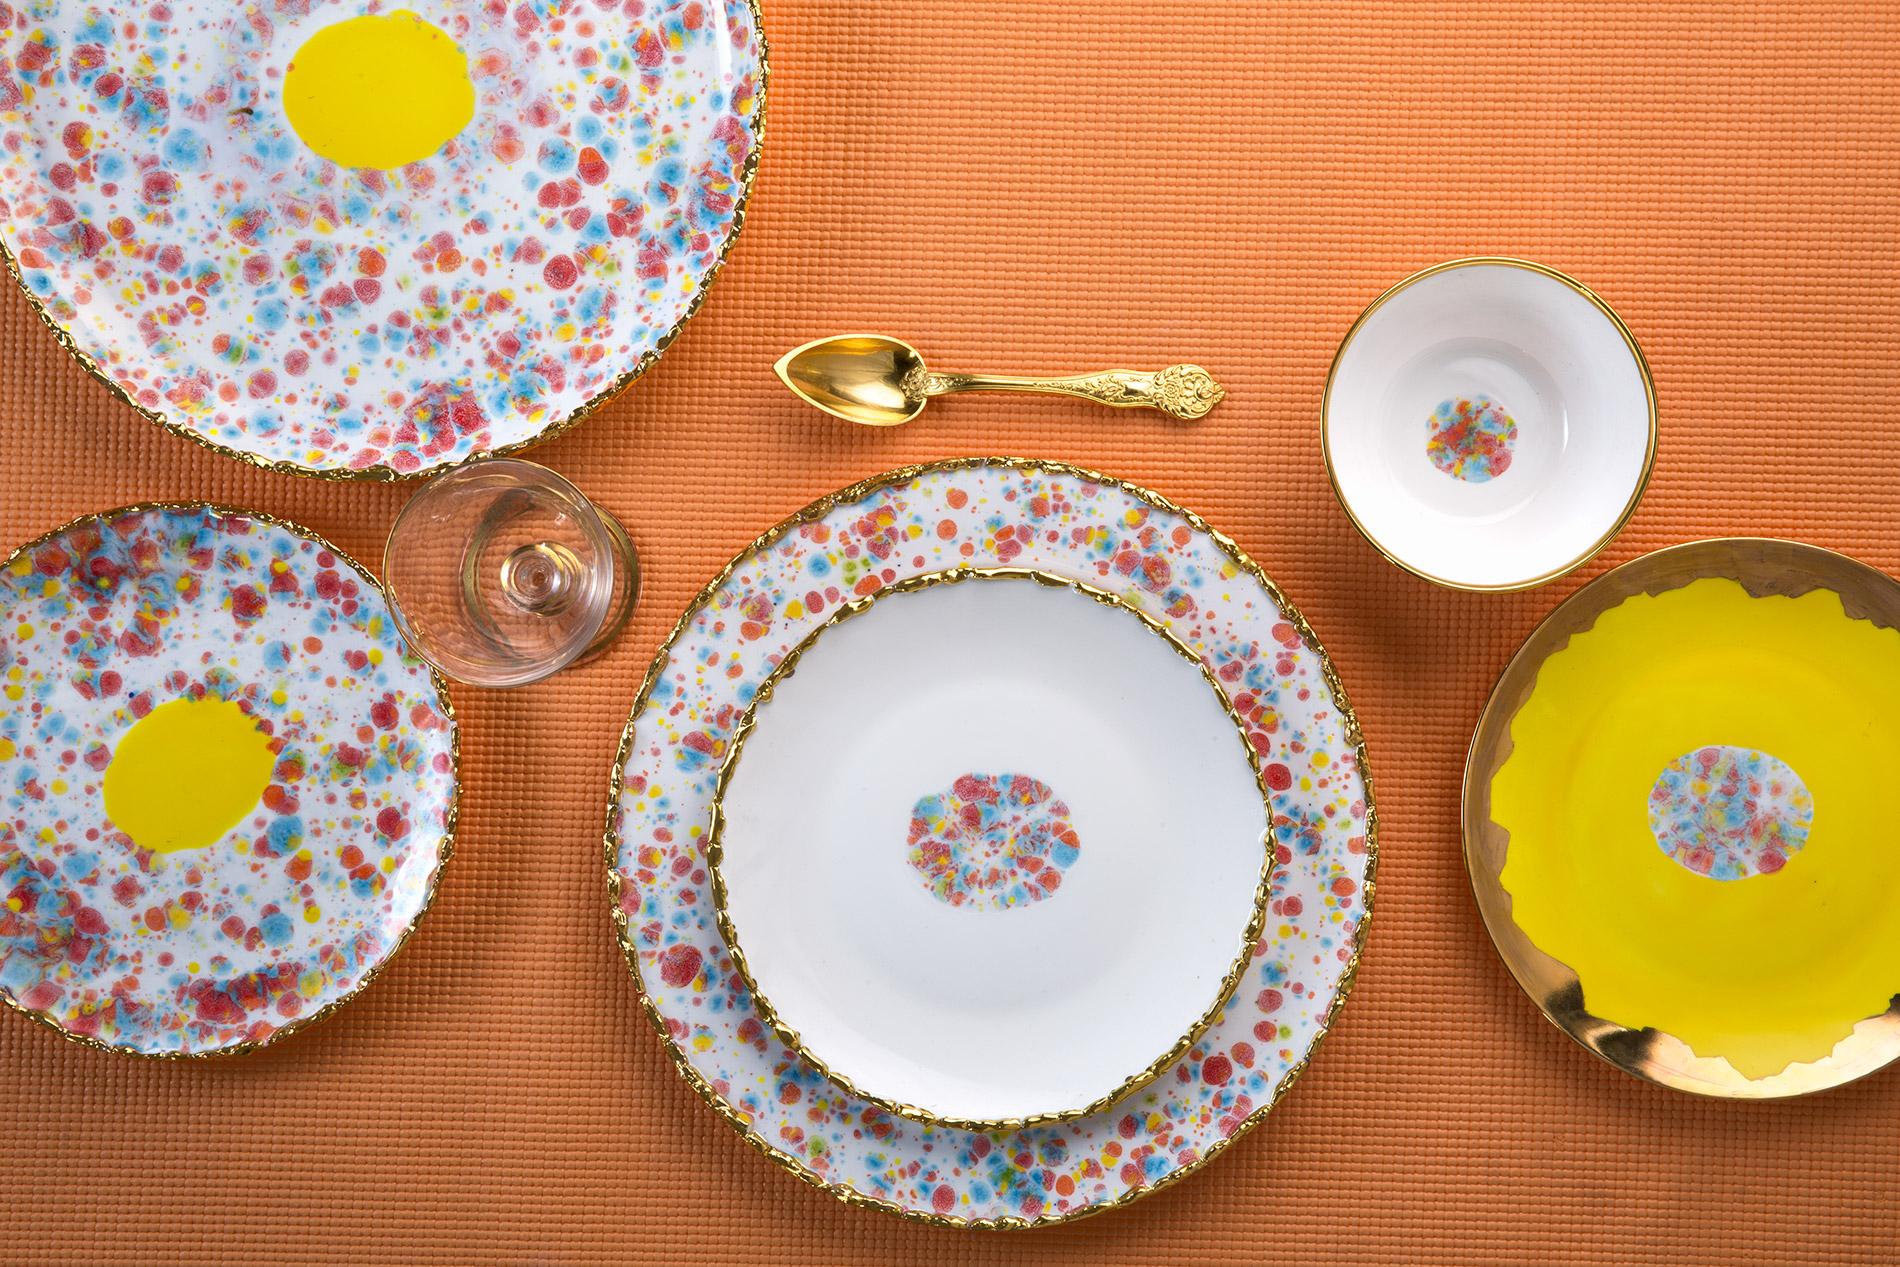 Handcrafted in Italy from the finest porcelain, this Craquelé Edge rim charger from the Confetti collection has an original golden crackled rim emphasizing the lively multi-color enamel and the yellow dot at its center.

Craquelé Edge rim charger,